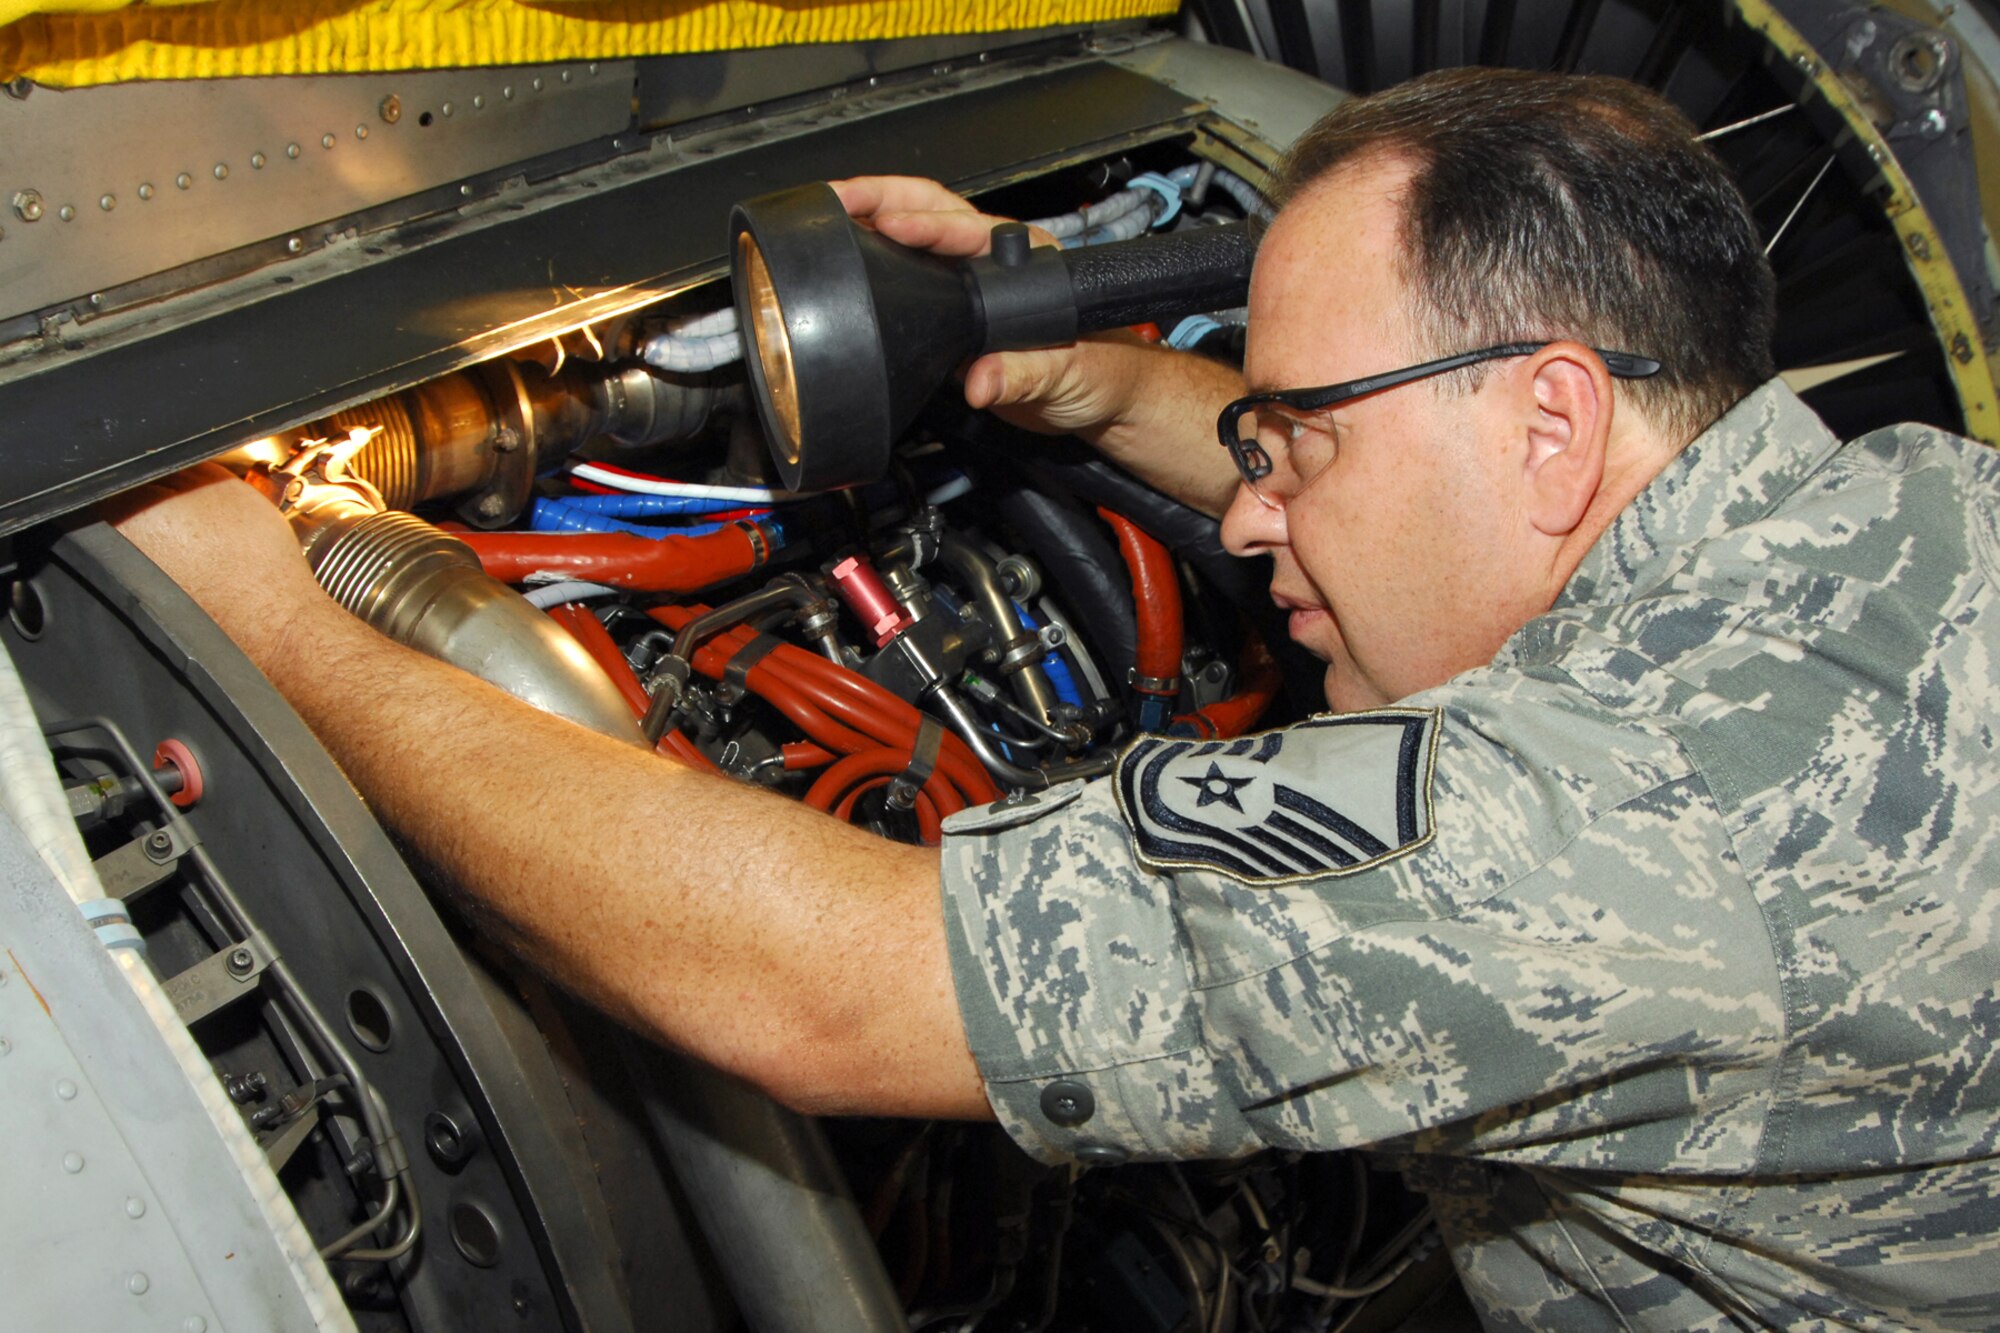 Master Sgt. Adrian Canchola works on a jet engine from an A-10 Thunderbolt II attack aircraft at Selfridge Air National Guard Base., July 27, 2011. The engine generates about 9,000 pounds of thrust. (USAF photo by John S. Swanson)